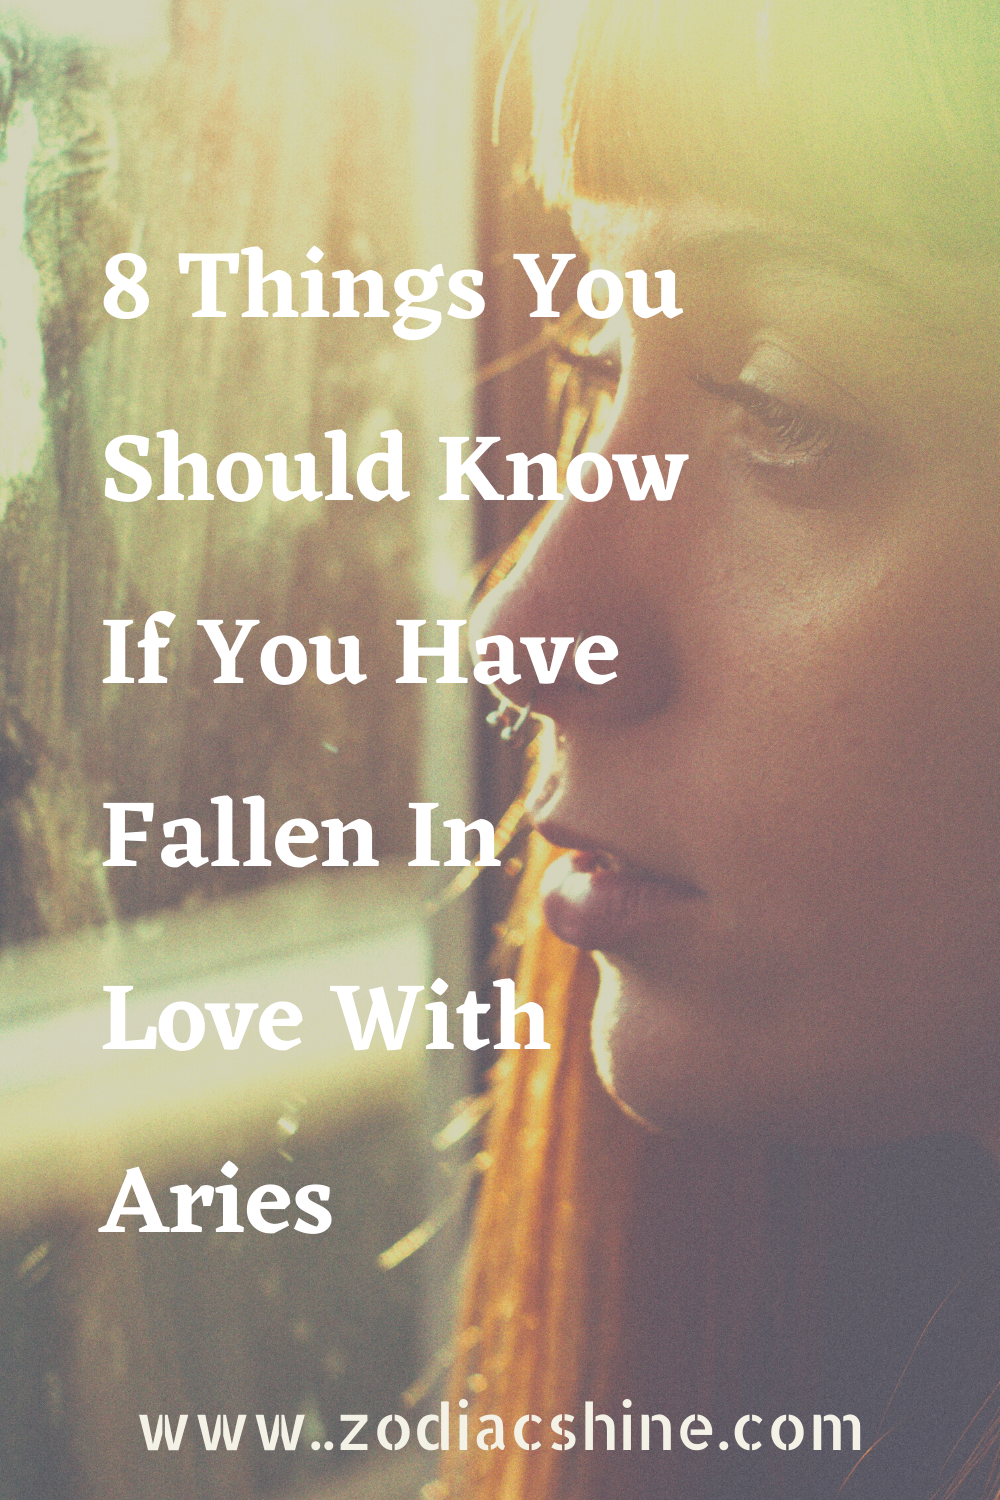 8 Things You Should Know If You Have Fallen In Love With Aries